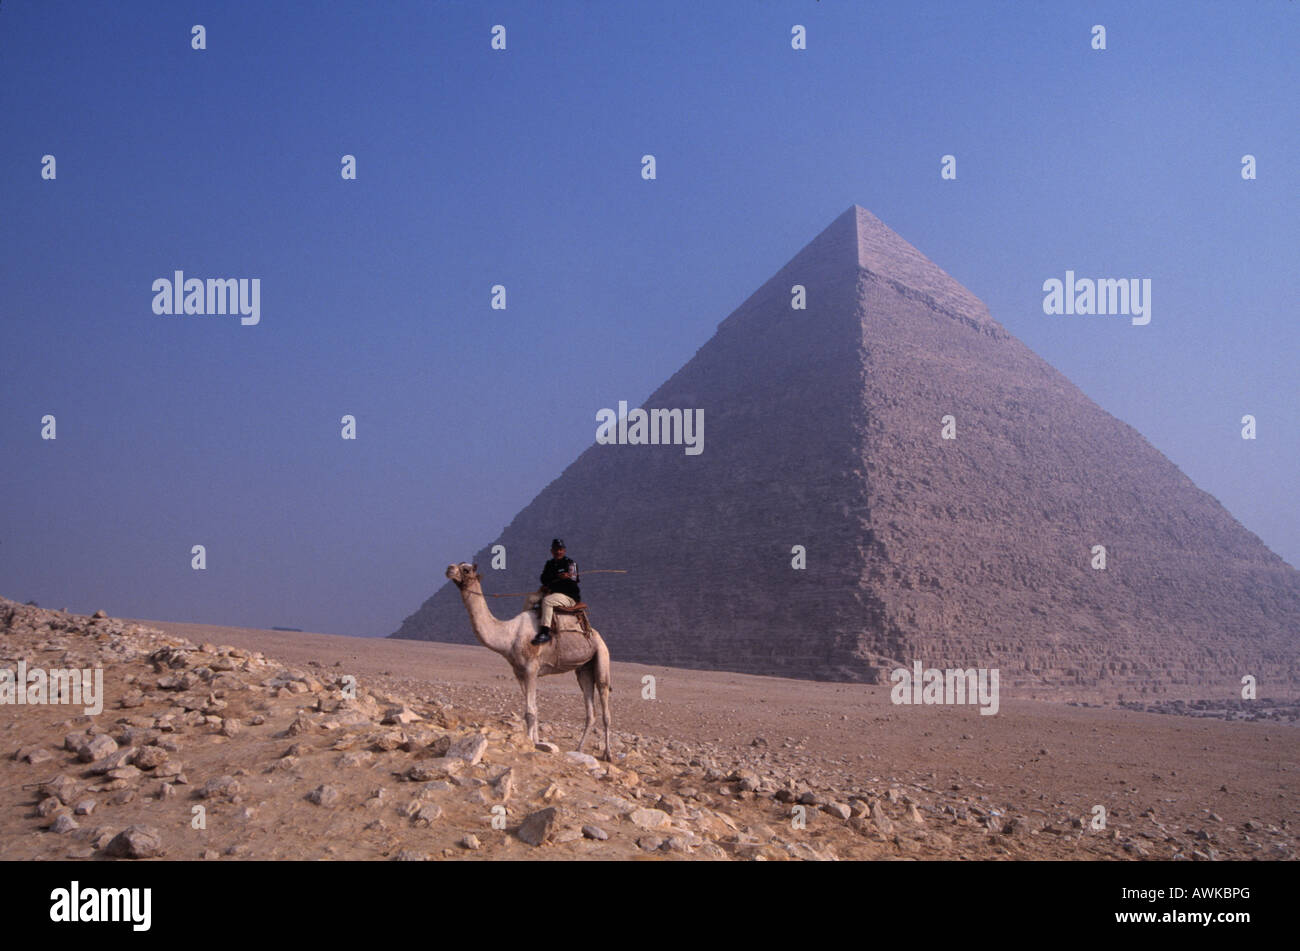 Pyramid and guard on a camel, Egypt Stock Photo